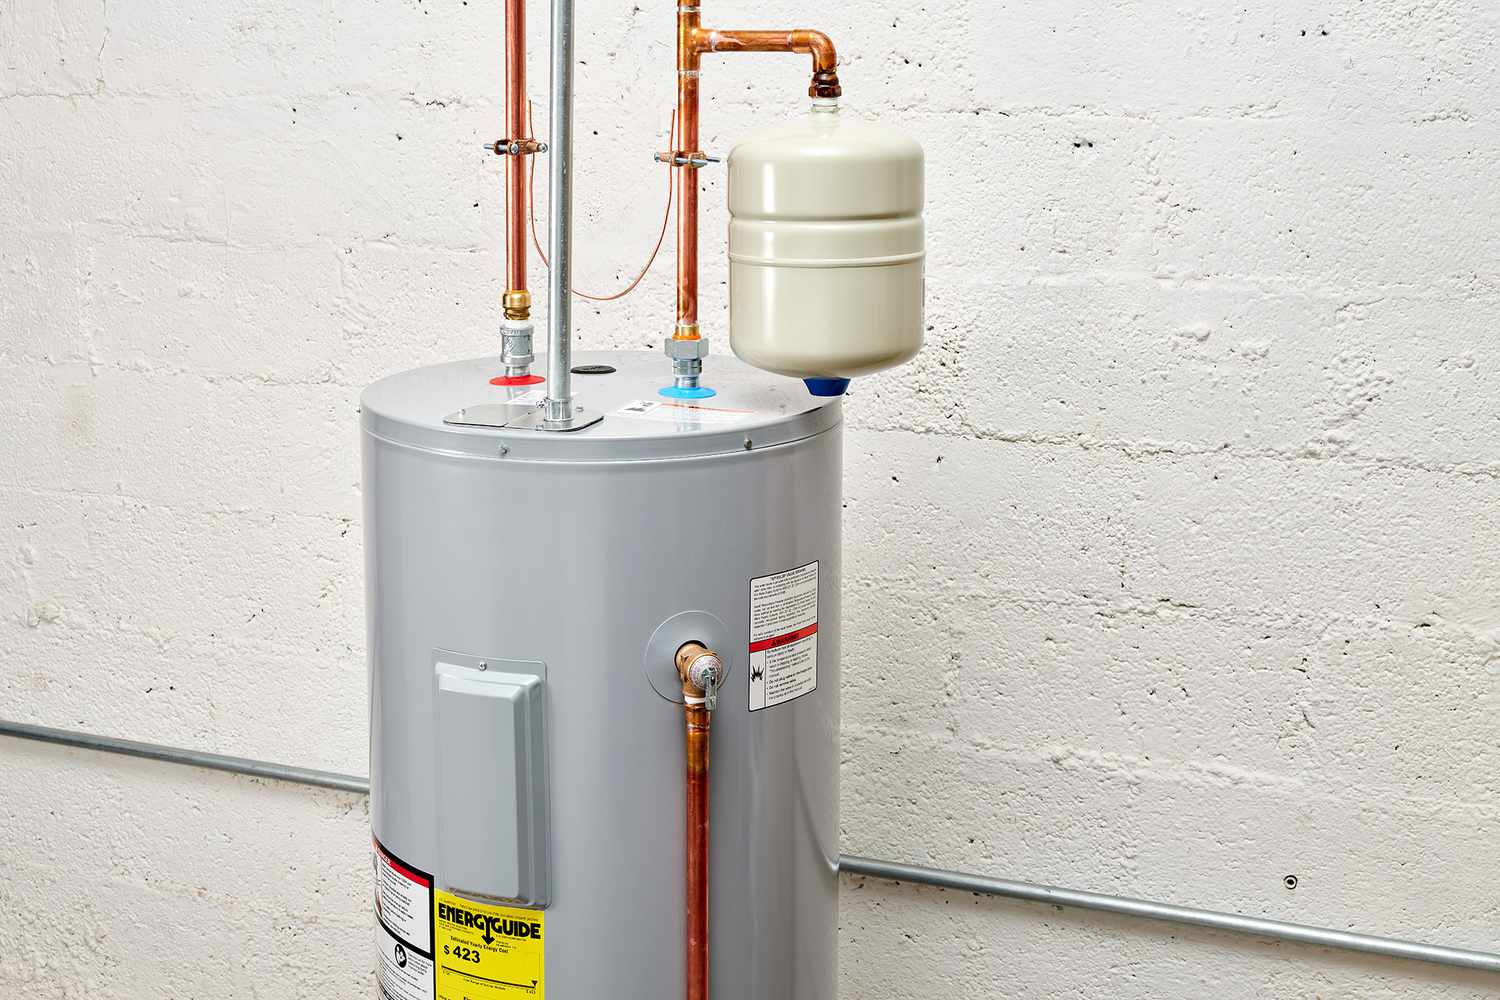 Learn more about which type of water heater in Singapore to use here.